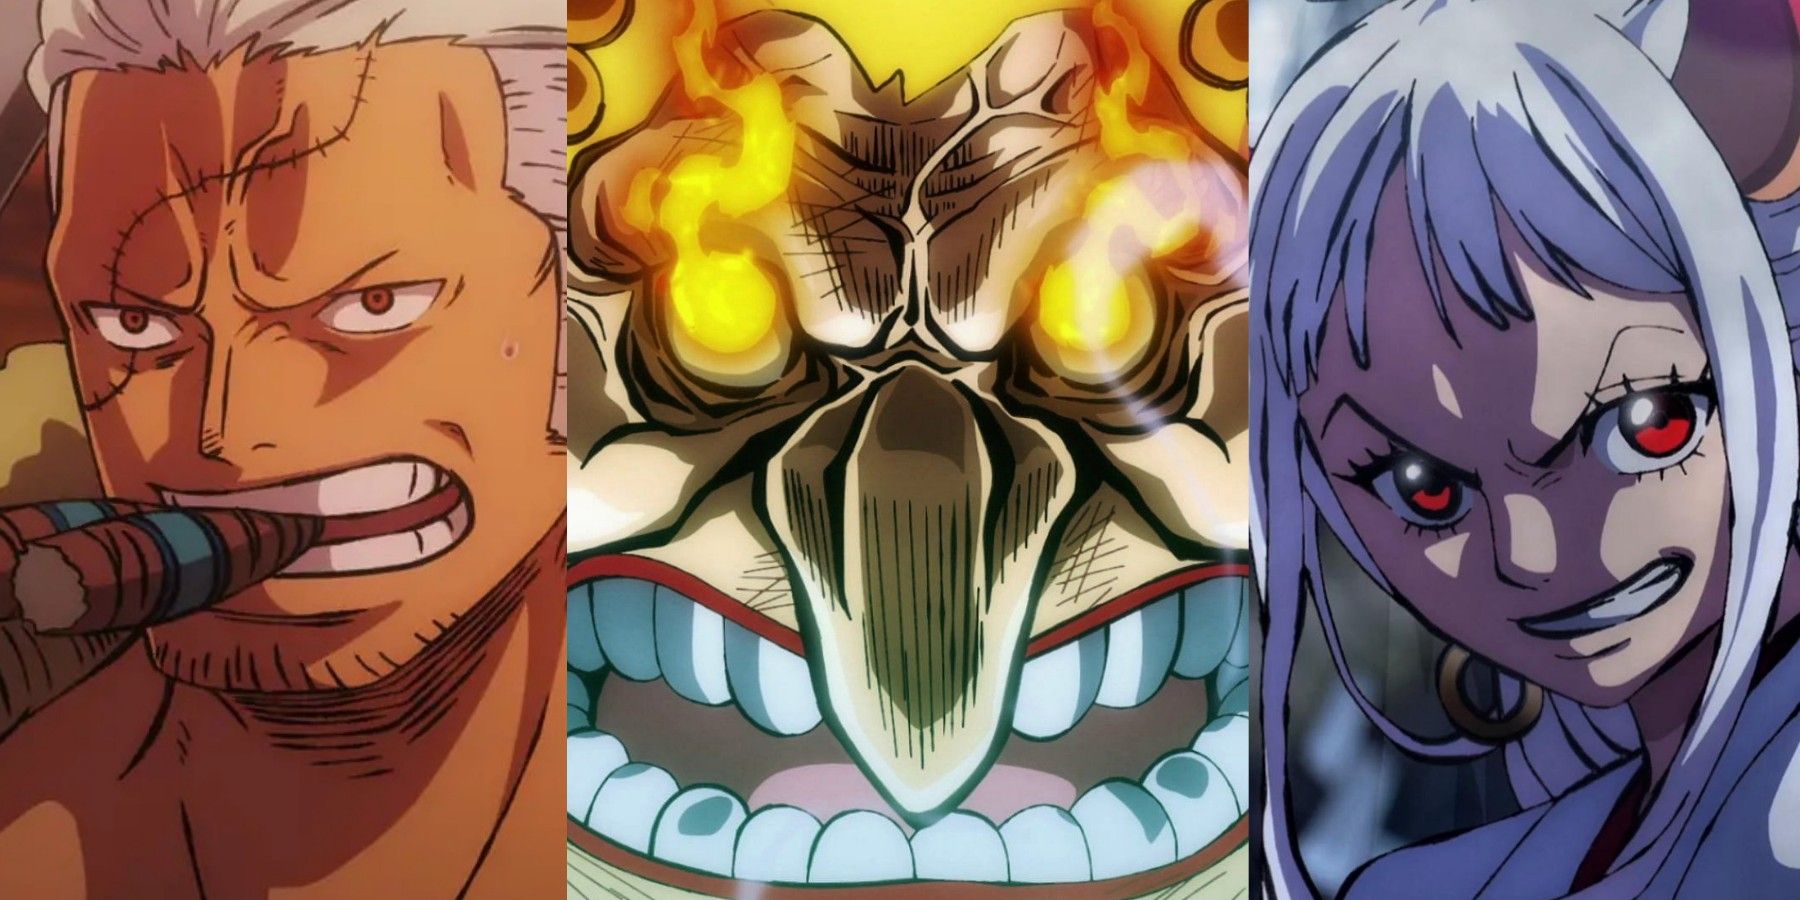 featured one piece characters misused by Oda big mom yamato smoker